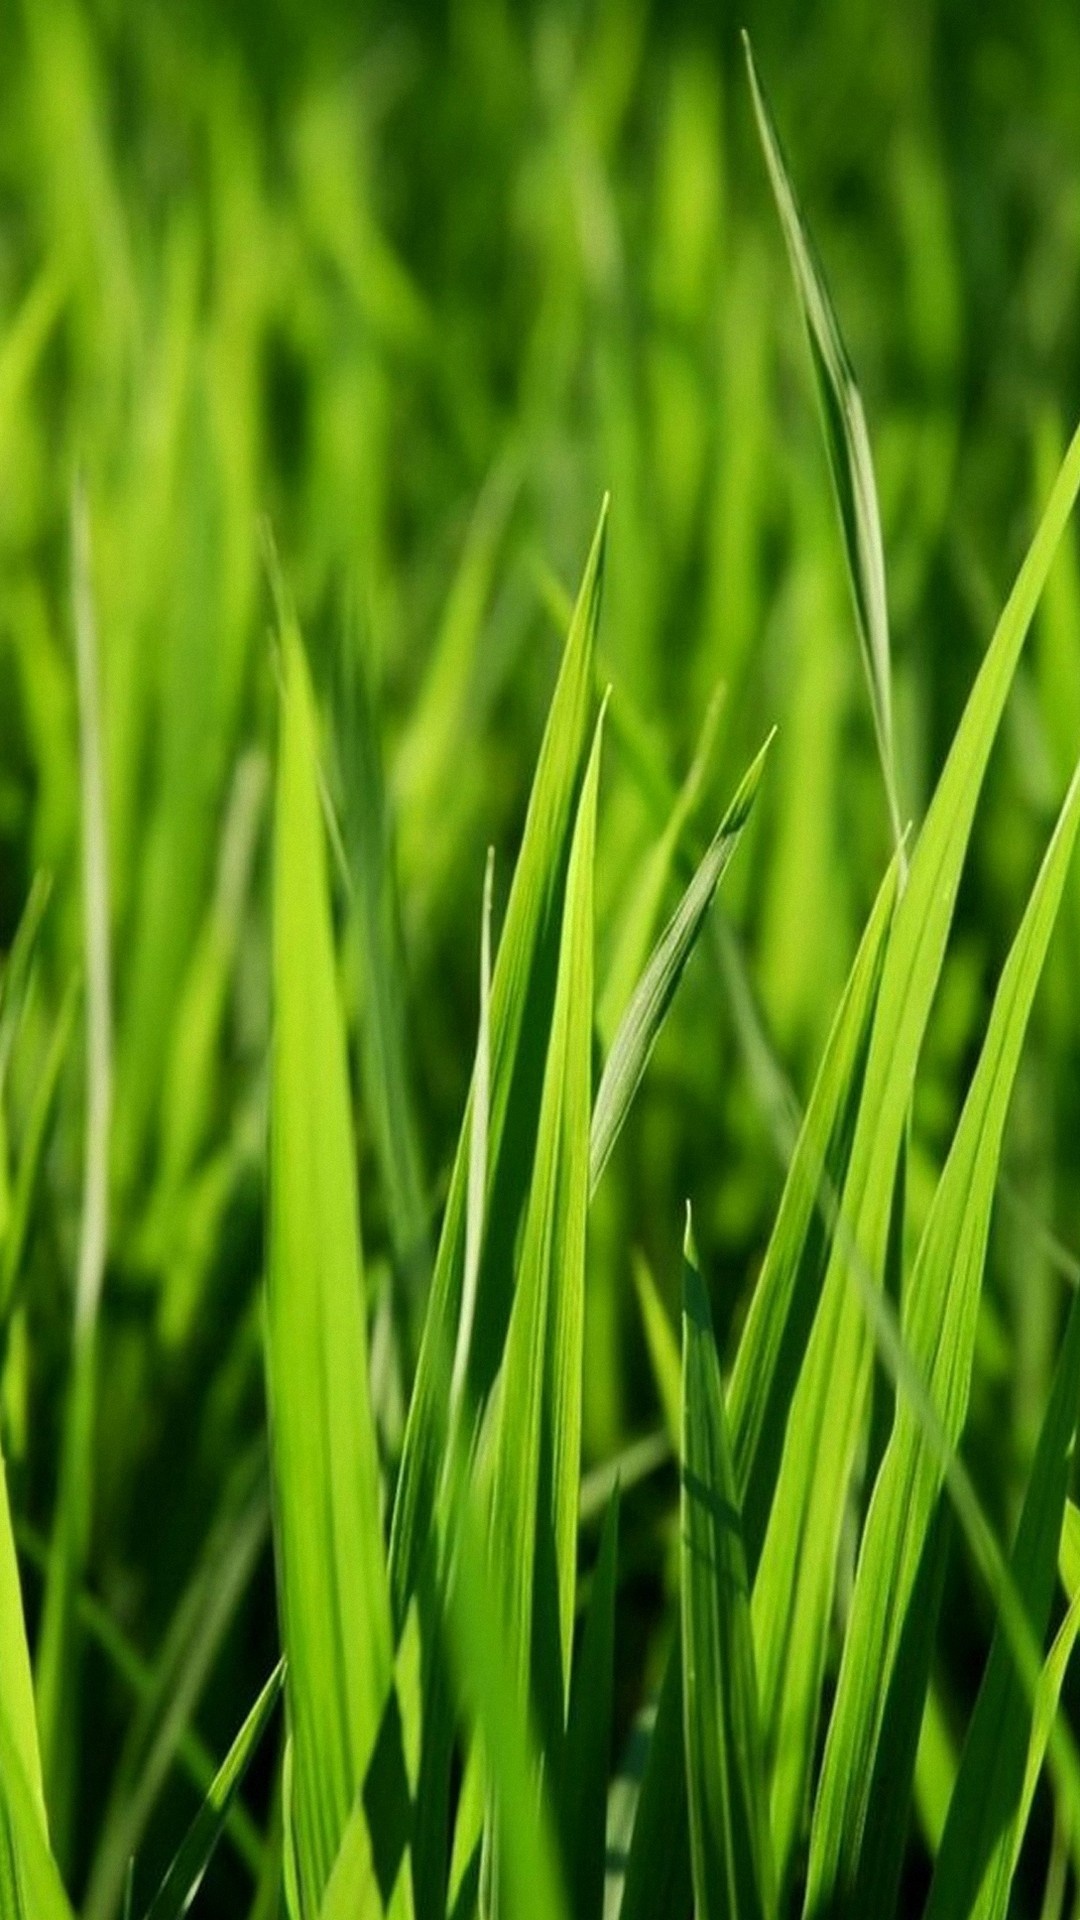 Grass wallpaper android, Android wallpapers, Green nature, Serene backdrop, 1080x1920 Full HD Handy